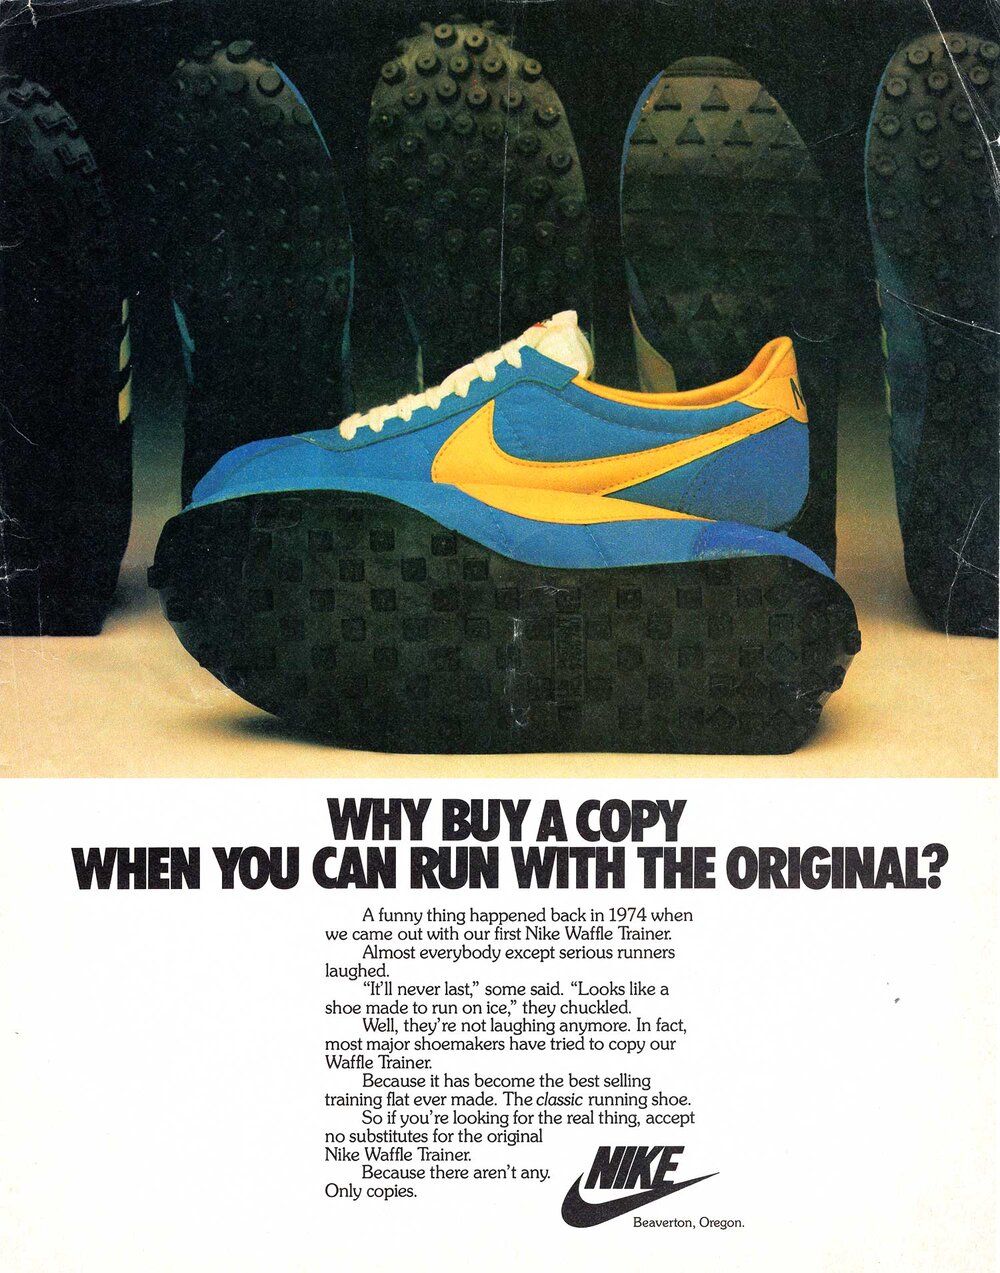 agencia Ilegible Polvoriento The Deffest®. A vintage and retro sneaker blog. — Nike Waffle Trainer 1979  vintage sneaker ad